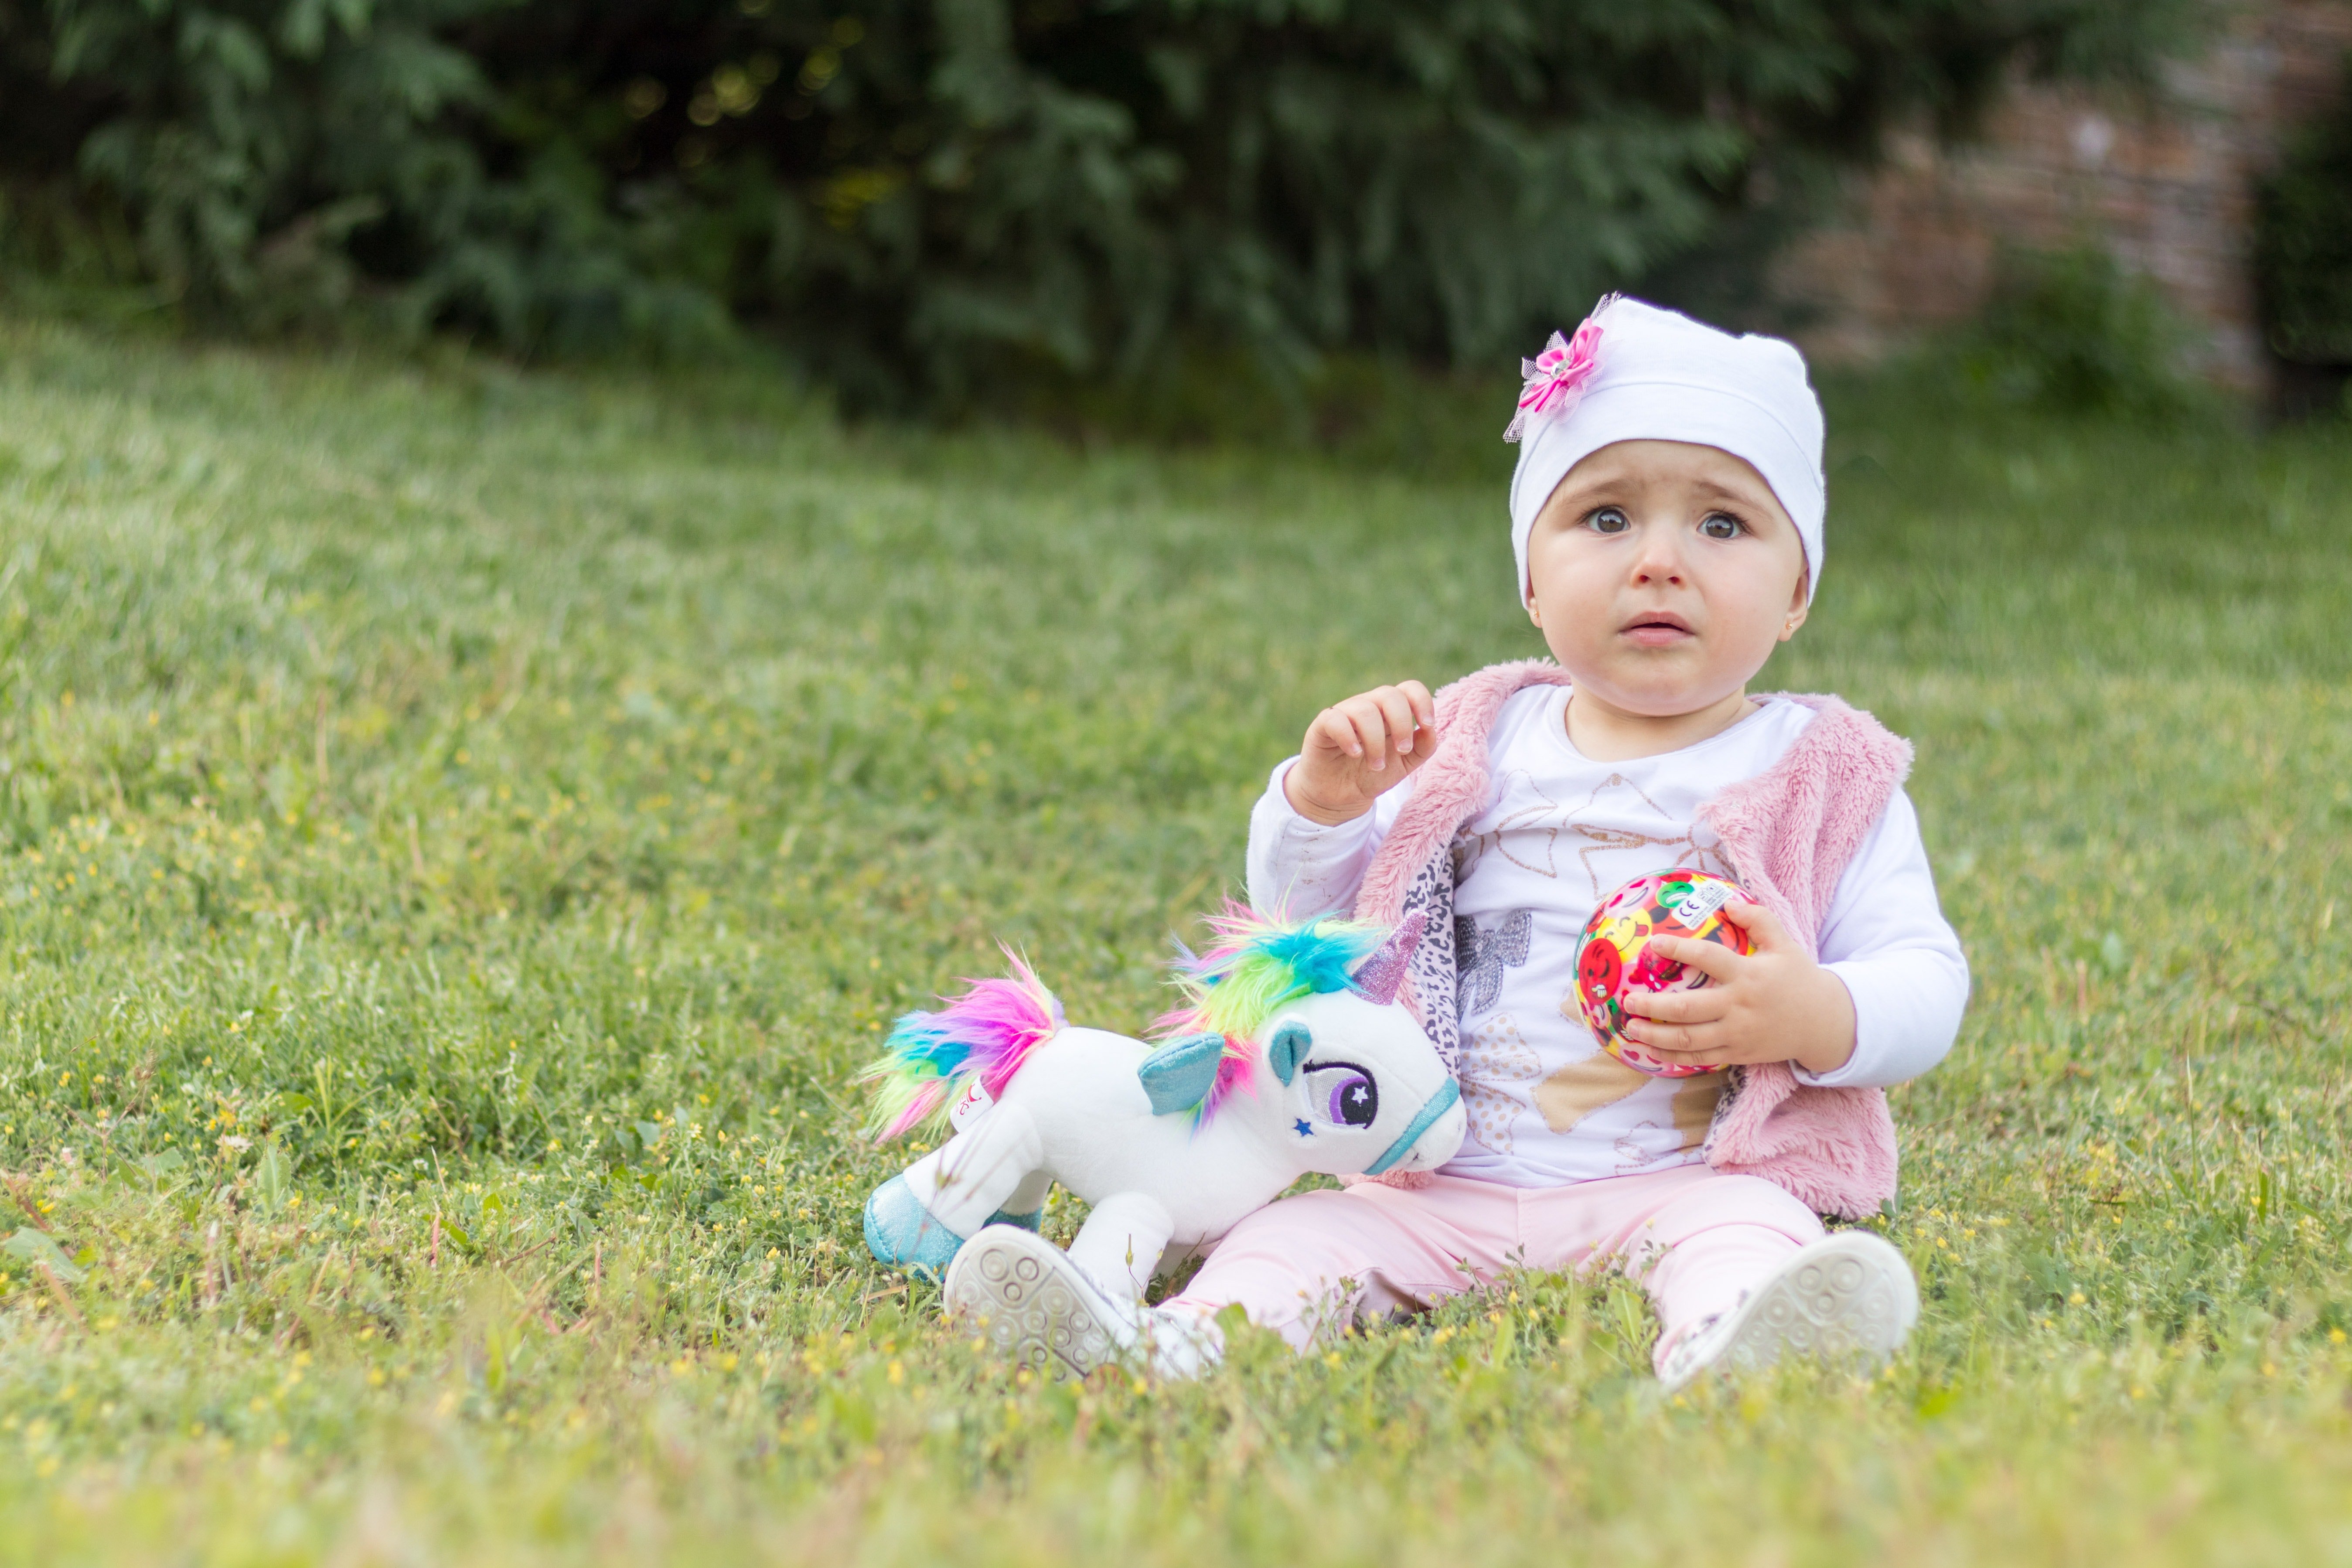 A baby sitting on the ground with toys | Source: Pexels